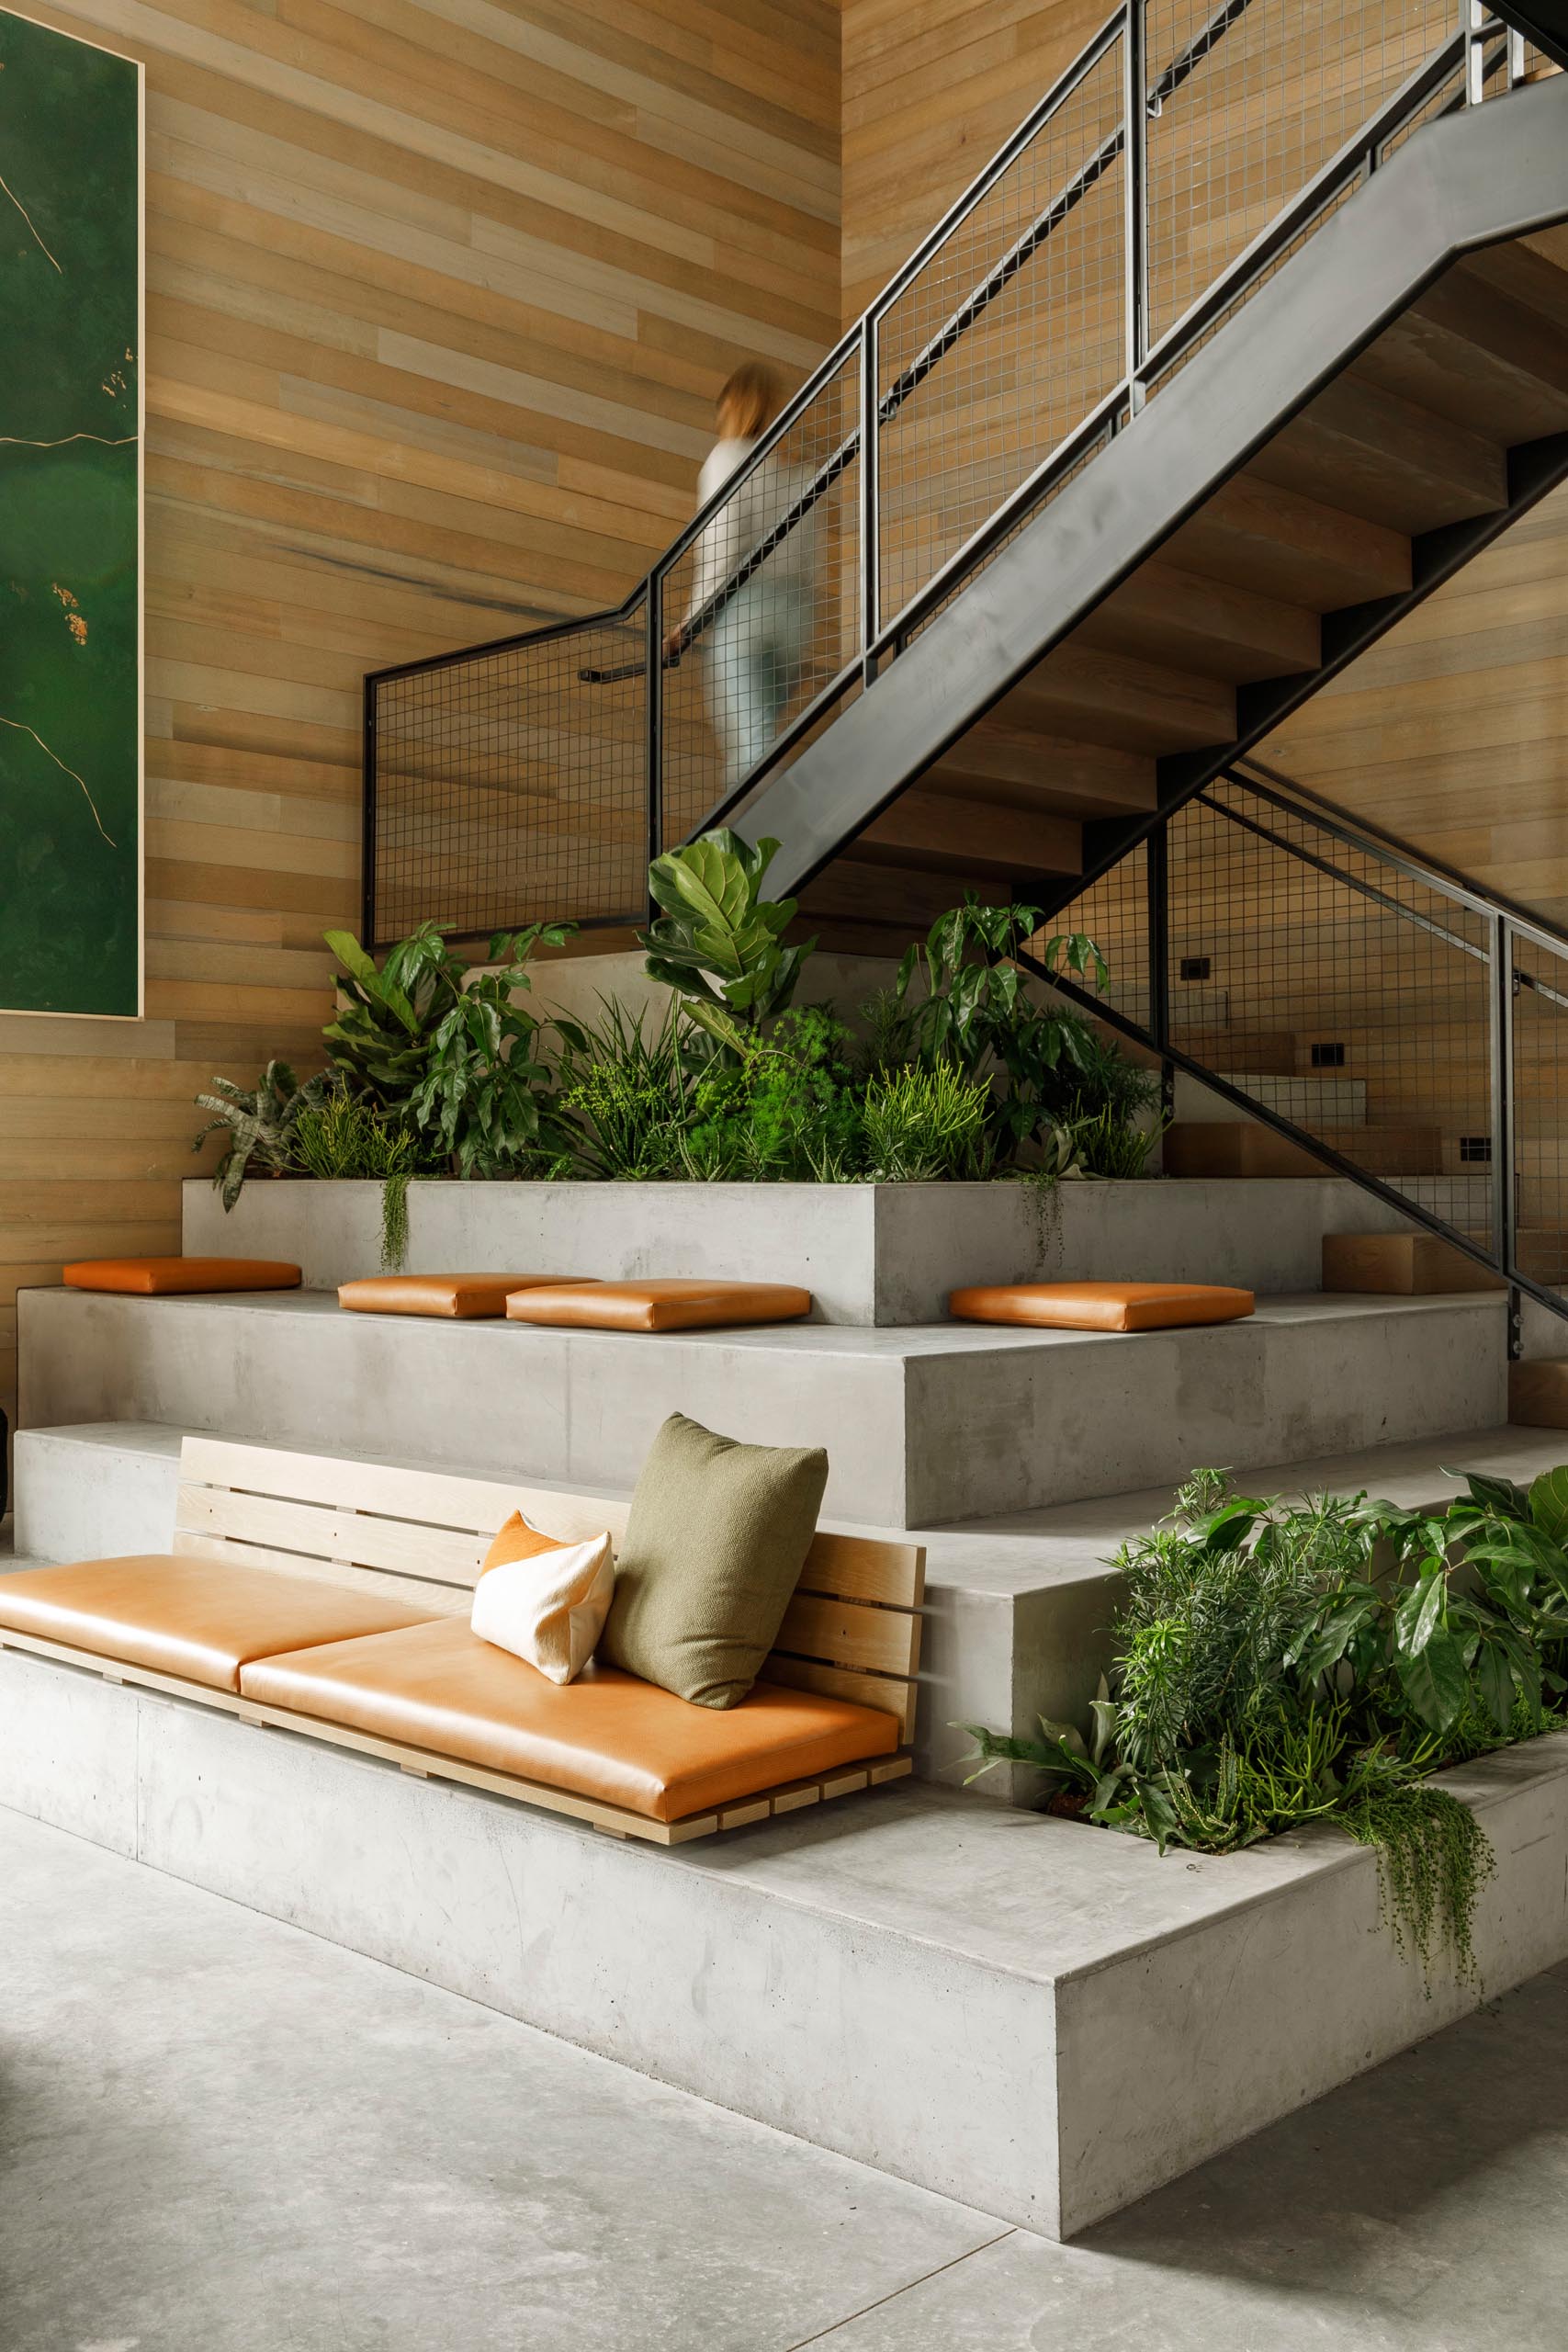 Tiered seating, created as an extension of the stairs, includes built-in planters.